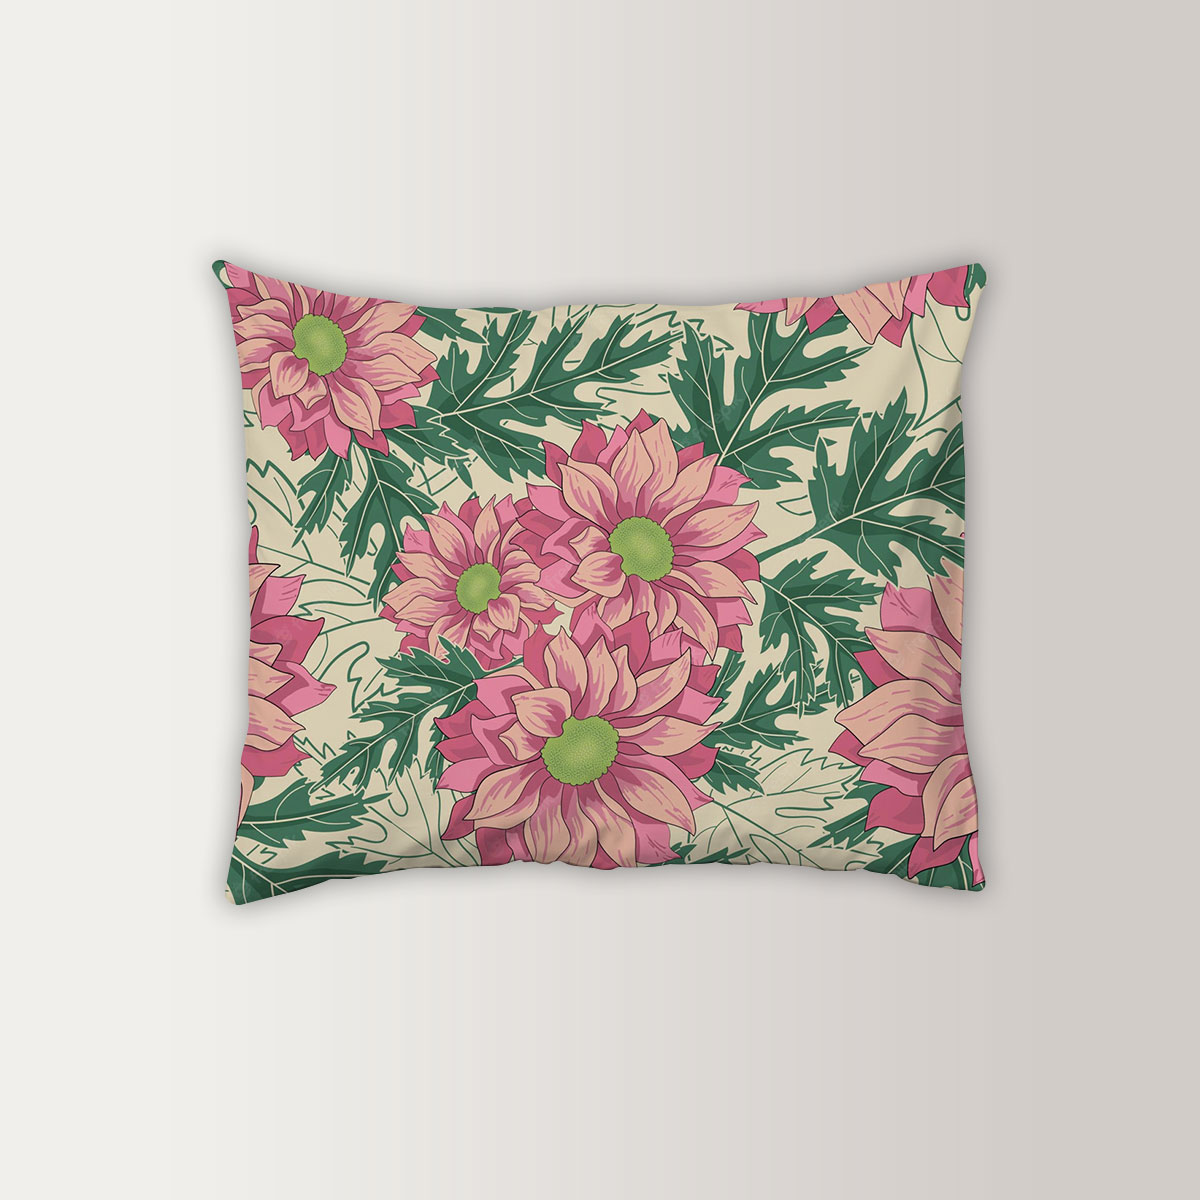 Vintage Chrysanthemum Flowers And Leaves Pillow Case